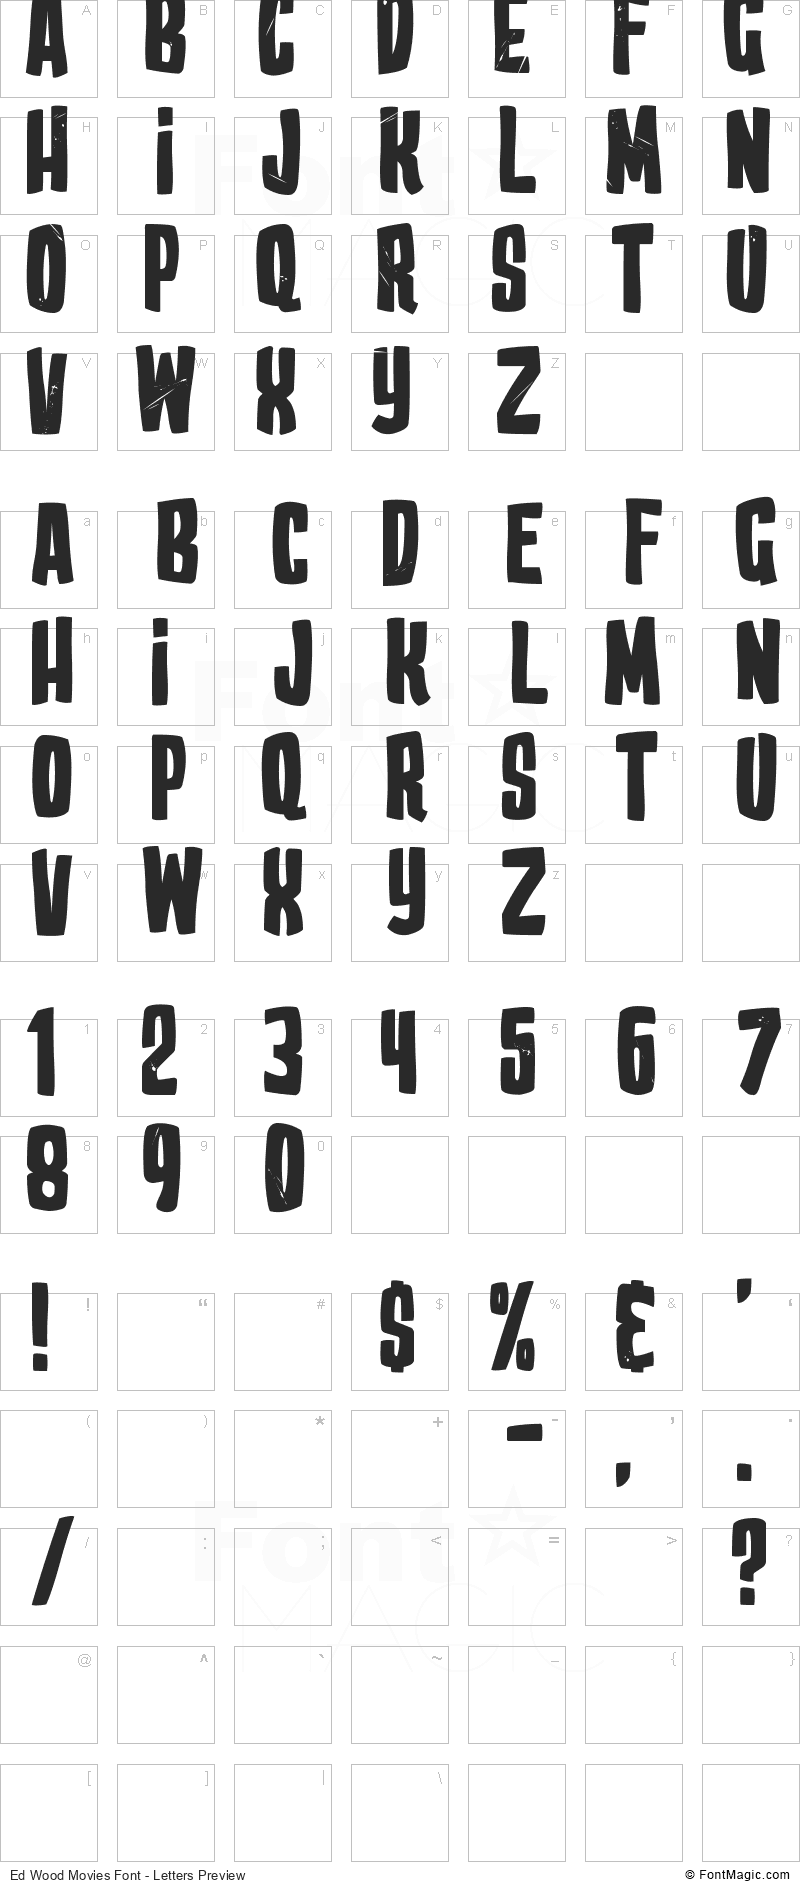 Ed Wood Movies Font - All Latters Preview Chart